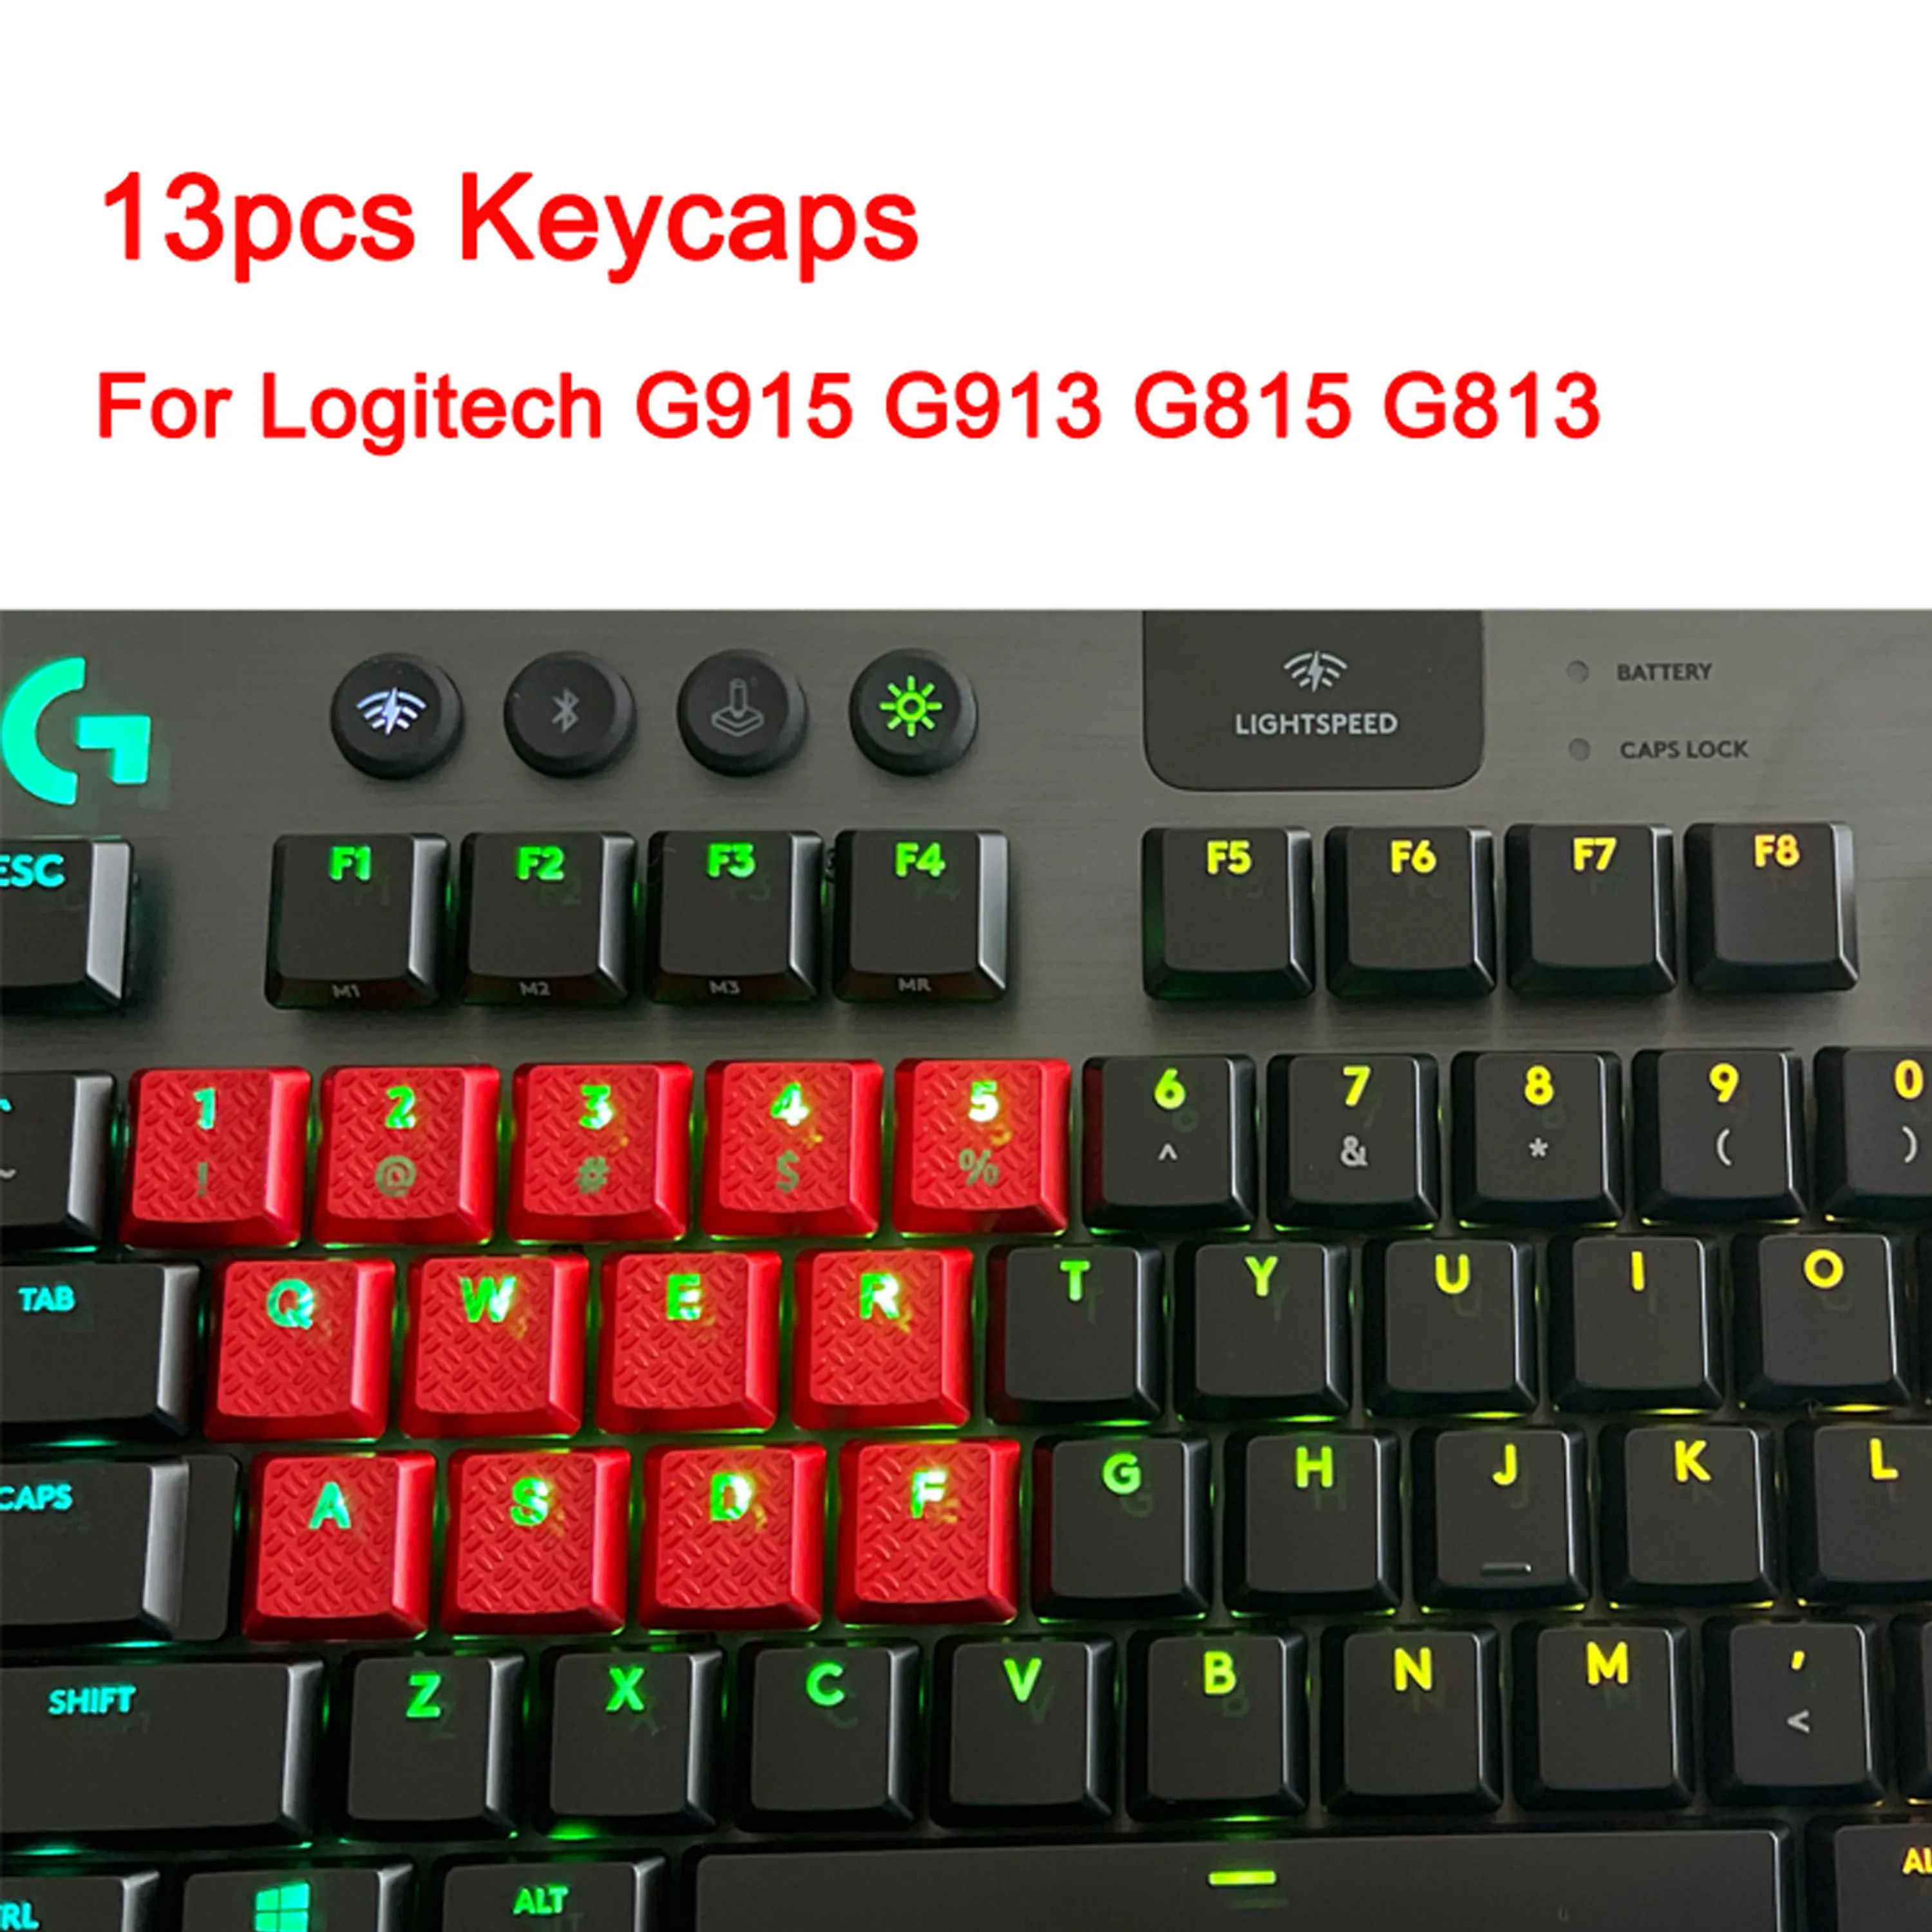 

13pcs Replacement Keycap Kit Texture Tactility Backlit Keycaps for Logitech G813 G815 G913 G915 TKL RGB Mechanical Keyboard